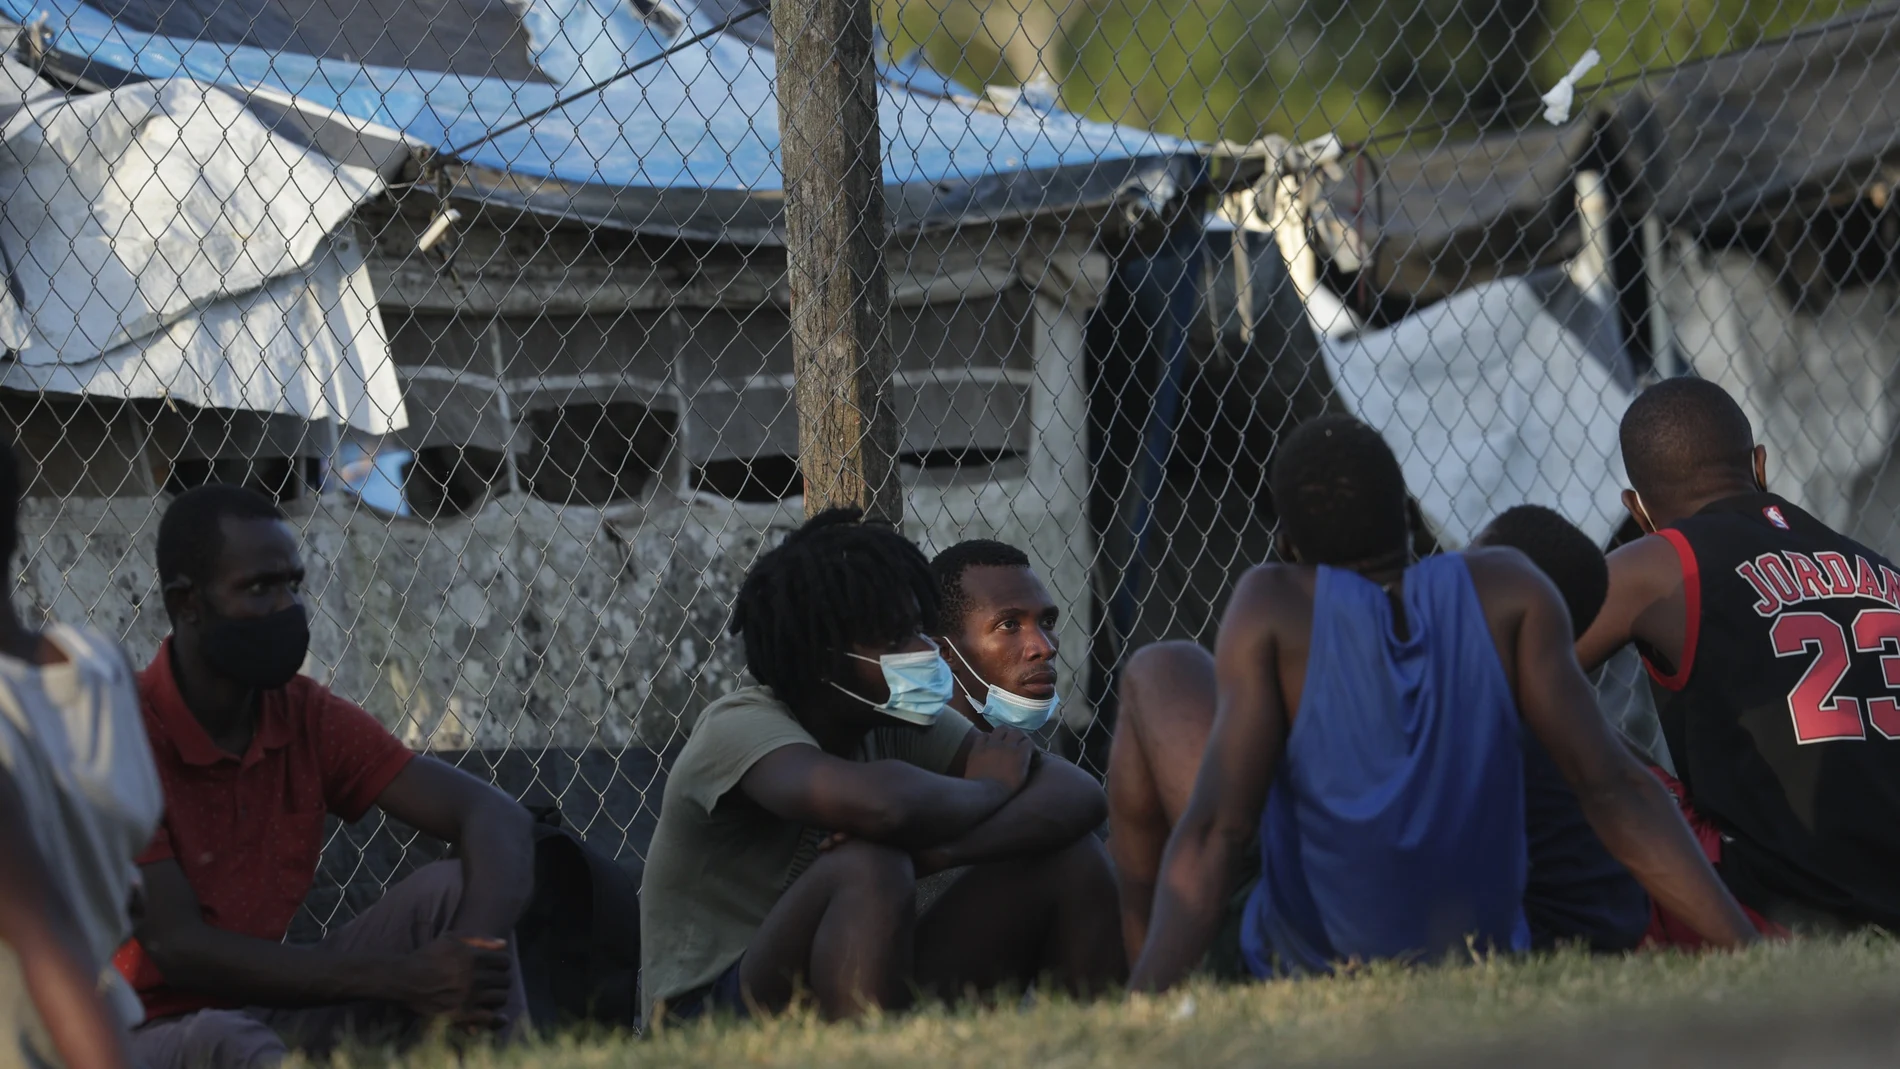 Haitian migrants sit on the grass at a migrant camp amid the new coronavirus pandemic in San Vicente, Darien province, Panama, Tuesday, Feb. 9, 2021. Panama is allowing hundreds of migrants stranded because of the pandemic, to move to the border with Costa Rica, after just reopening its land borders. (AP Photo/Arnulfo Franco)